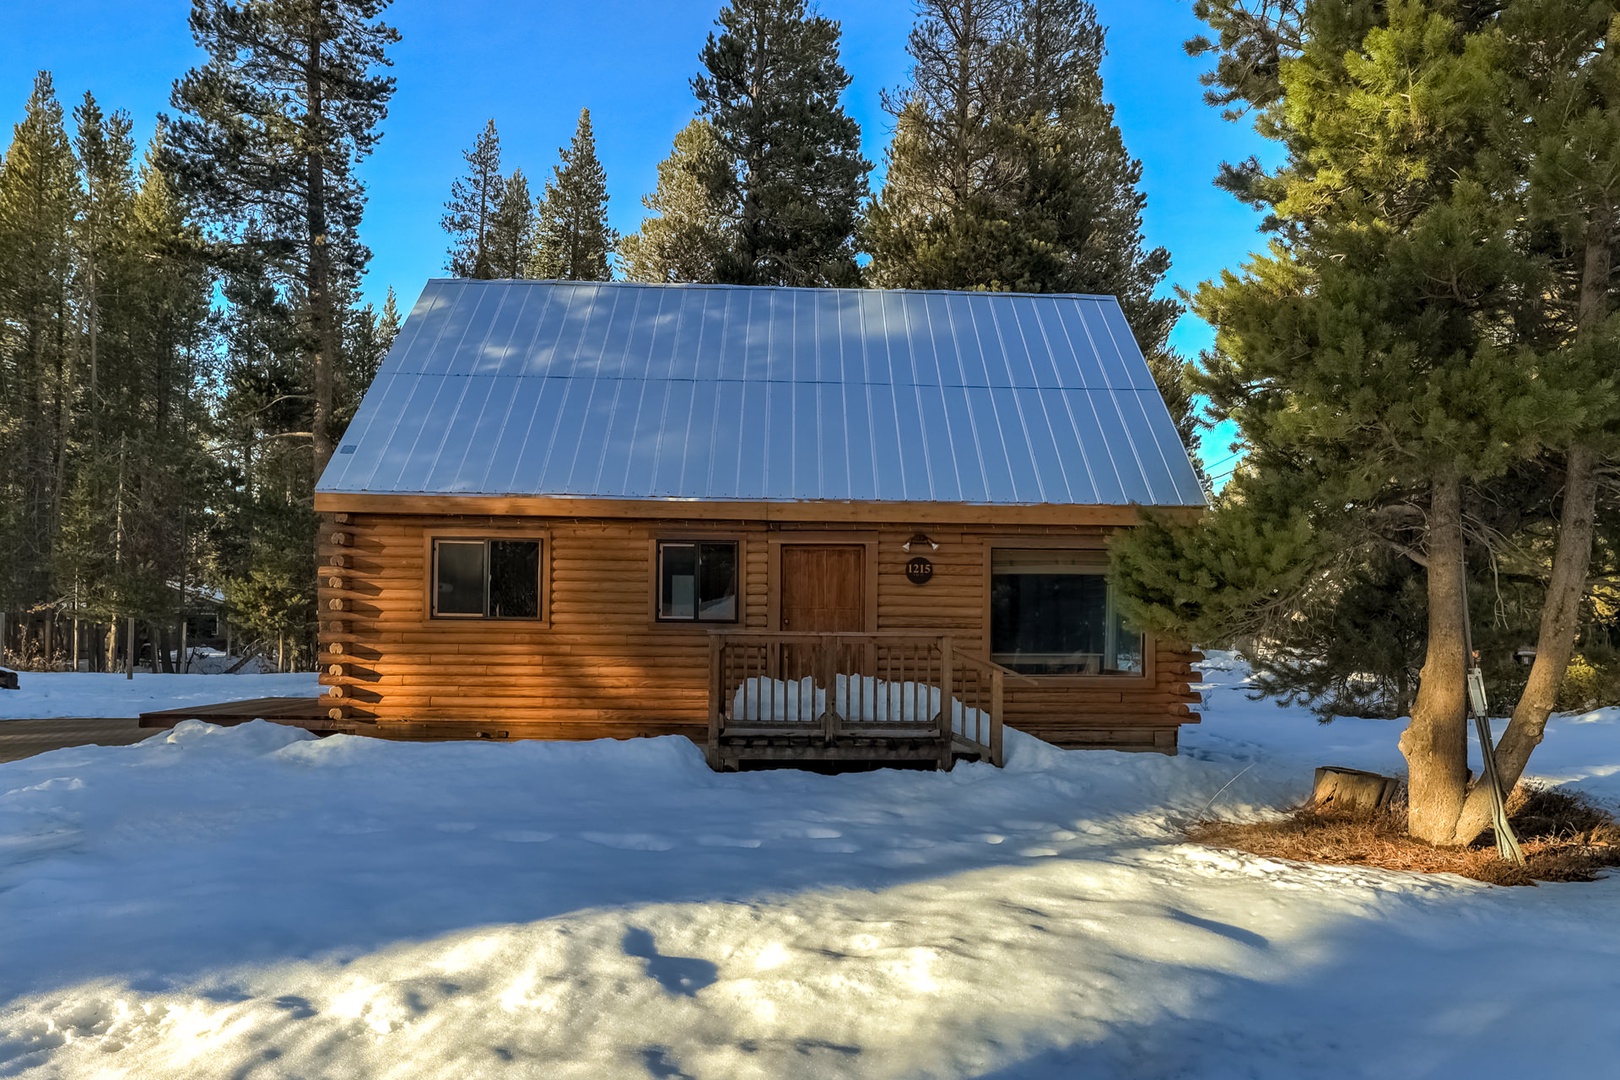 Augie's Log Cabin